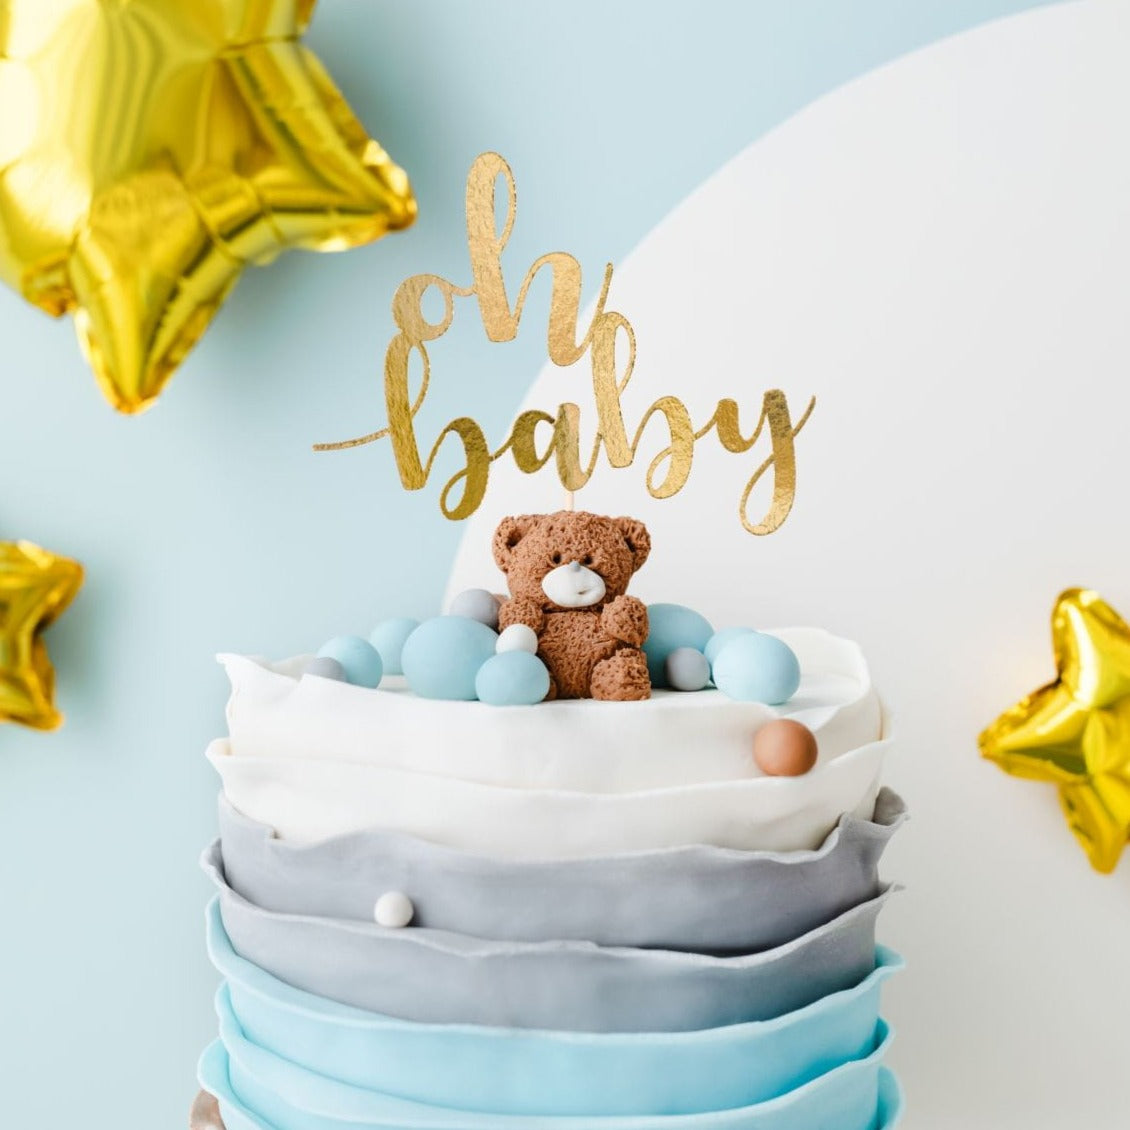 Partydeco: Topper for the golden cake Oh Baby